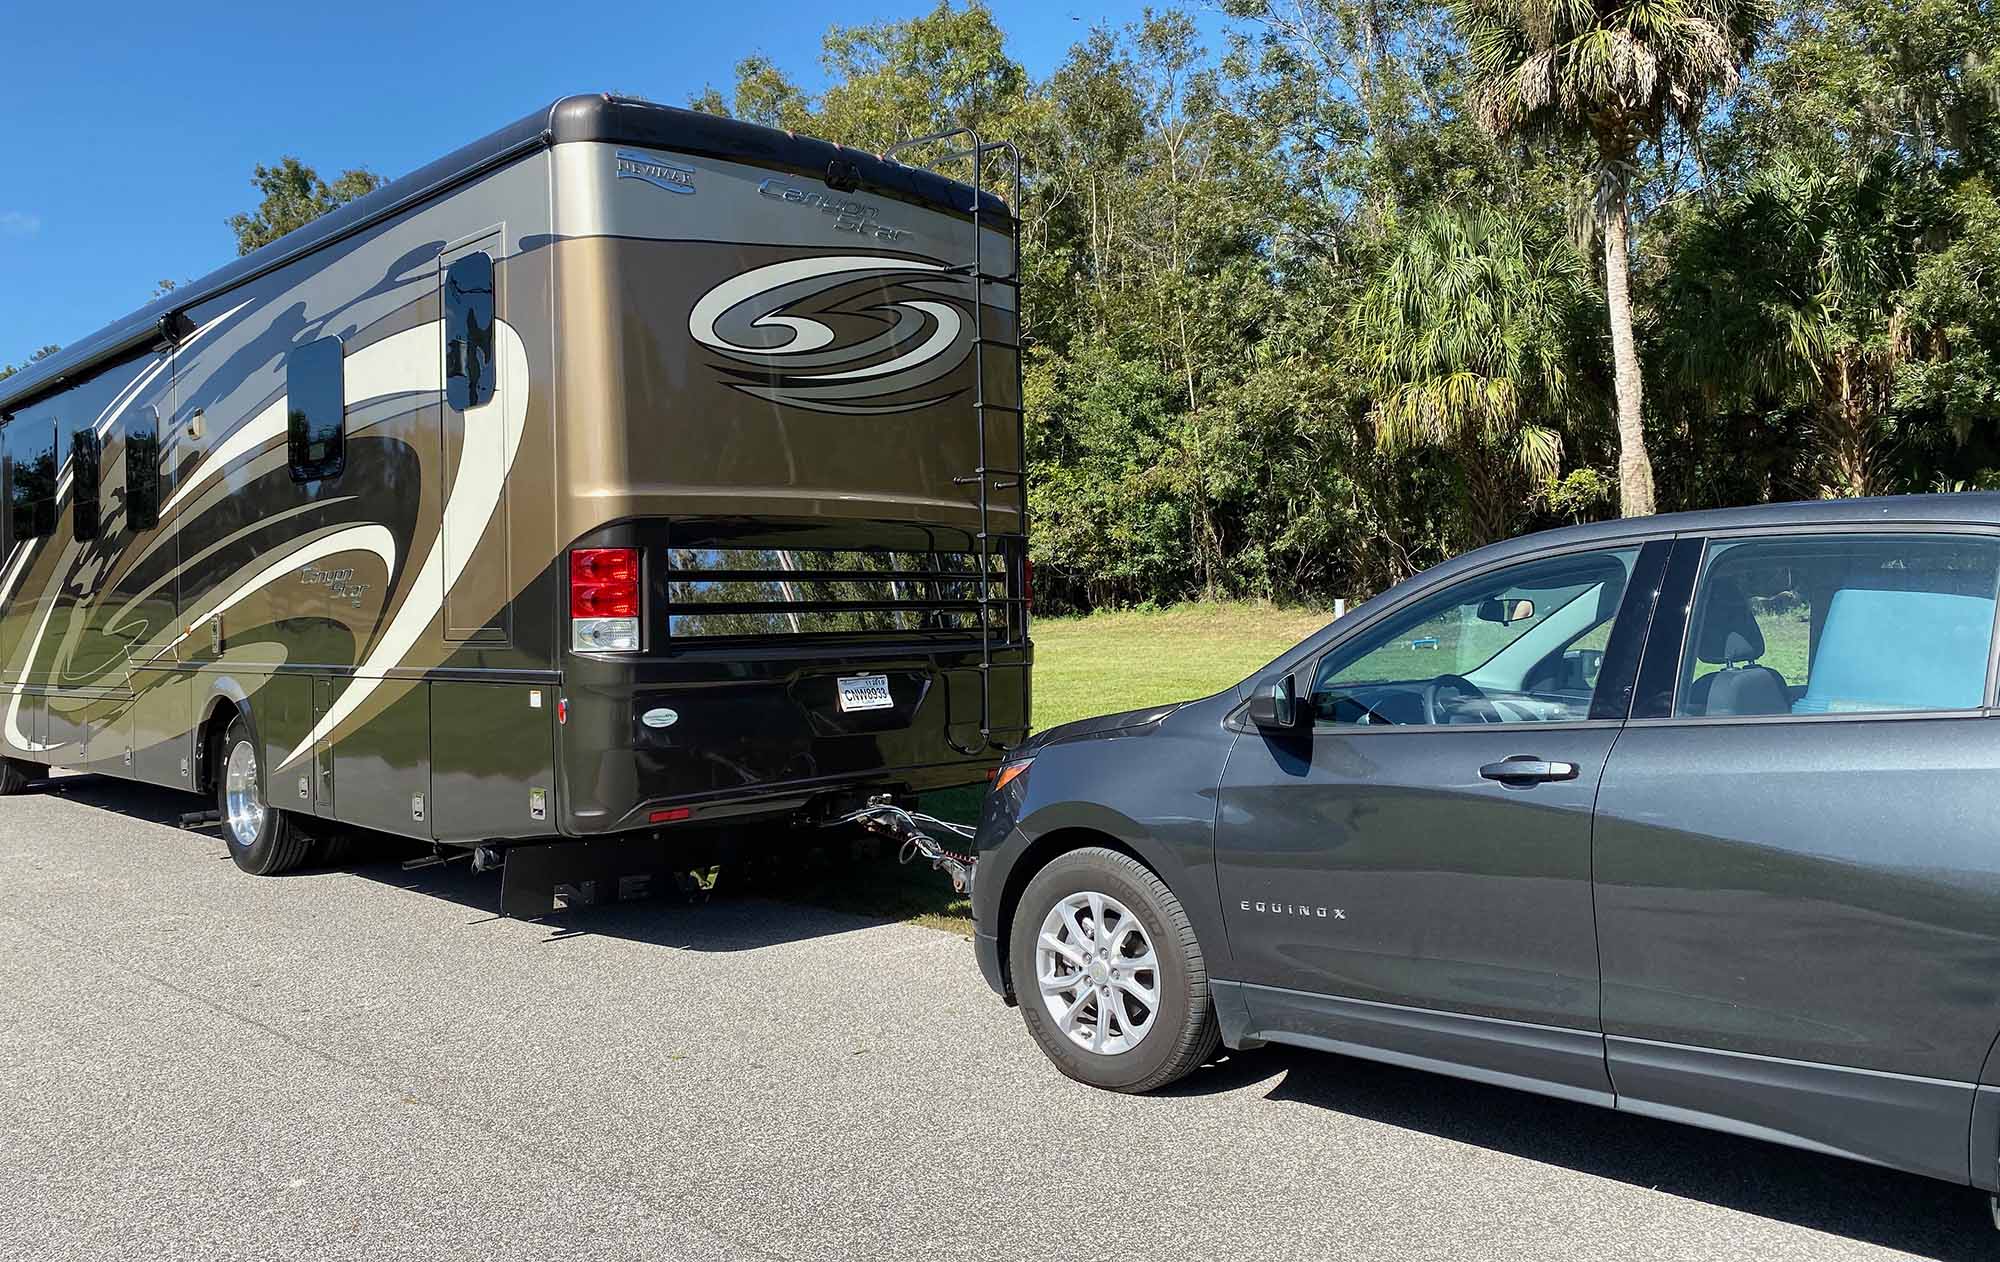 large new canyon star class a motorhome towing a Chevrolet equinox